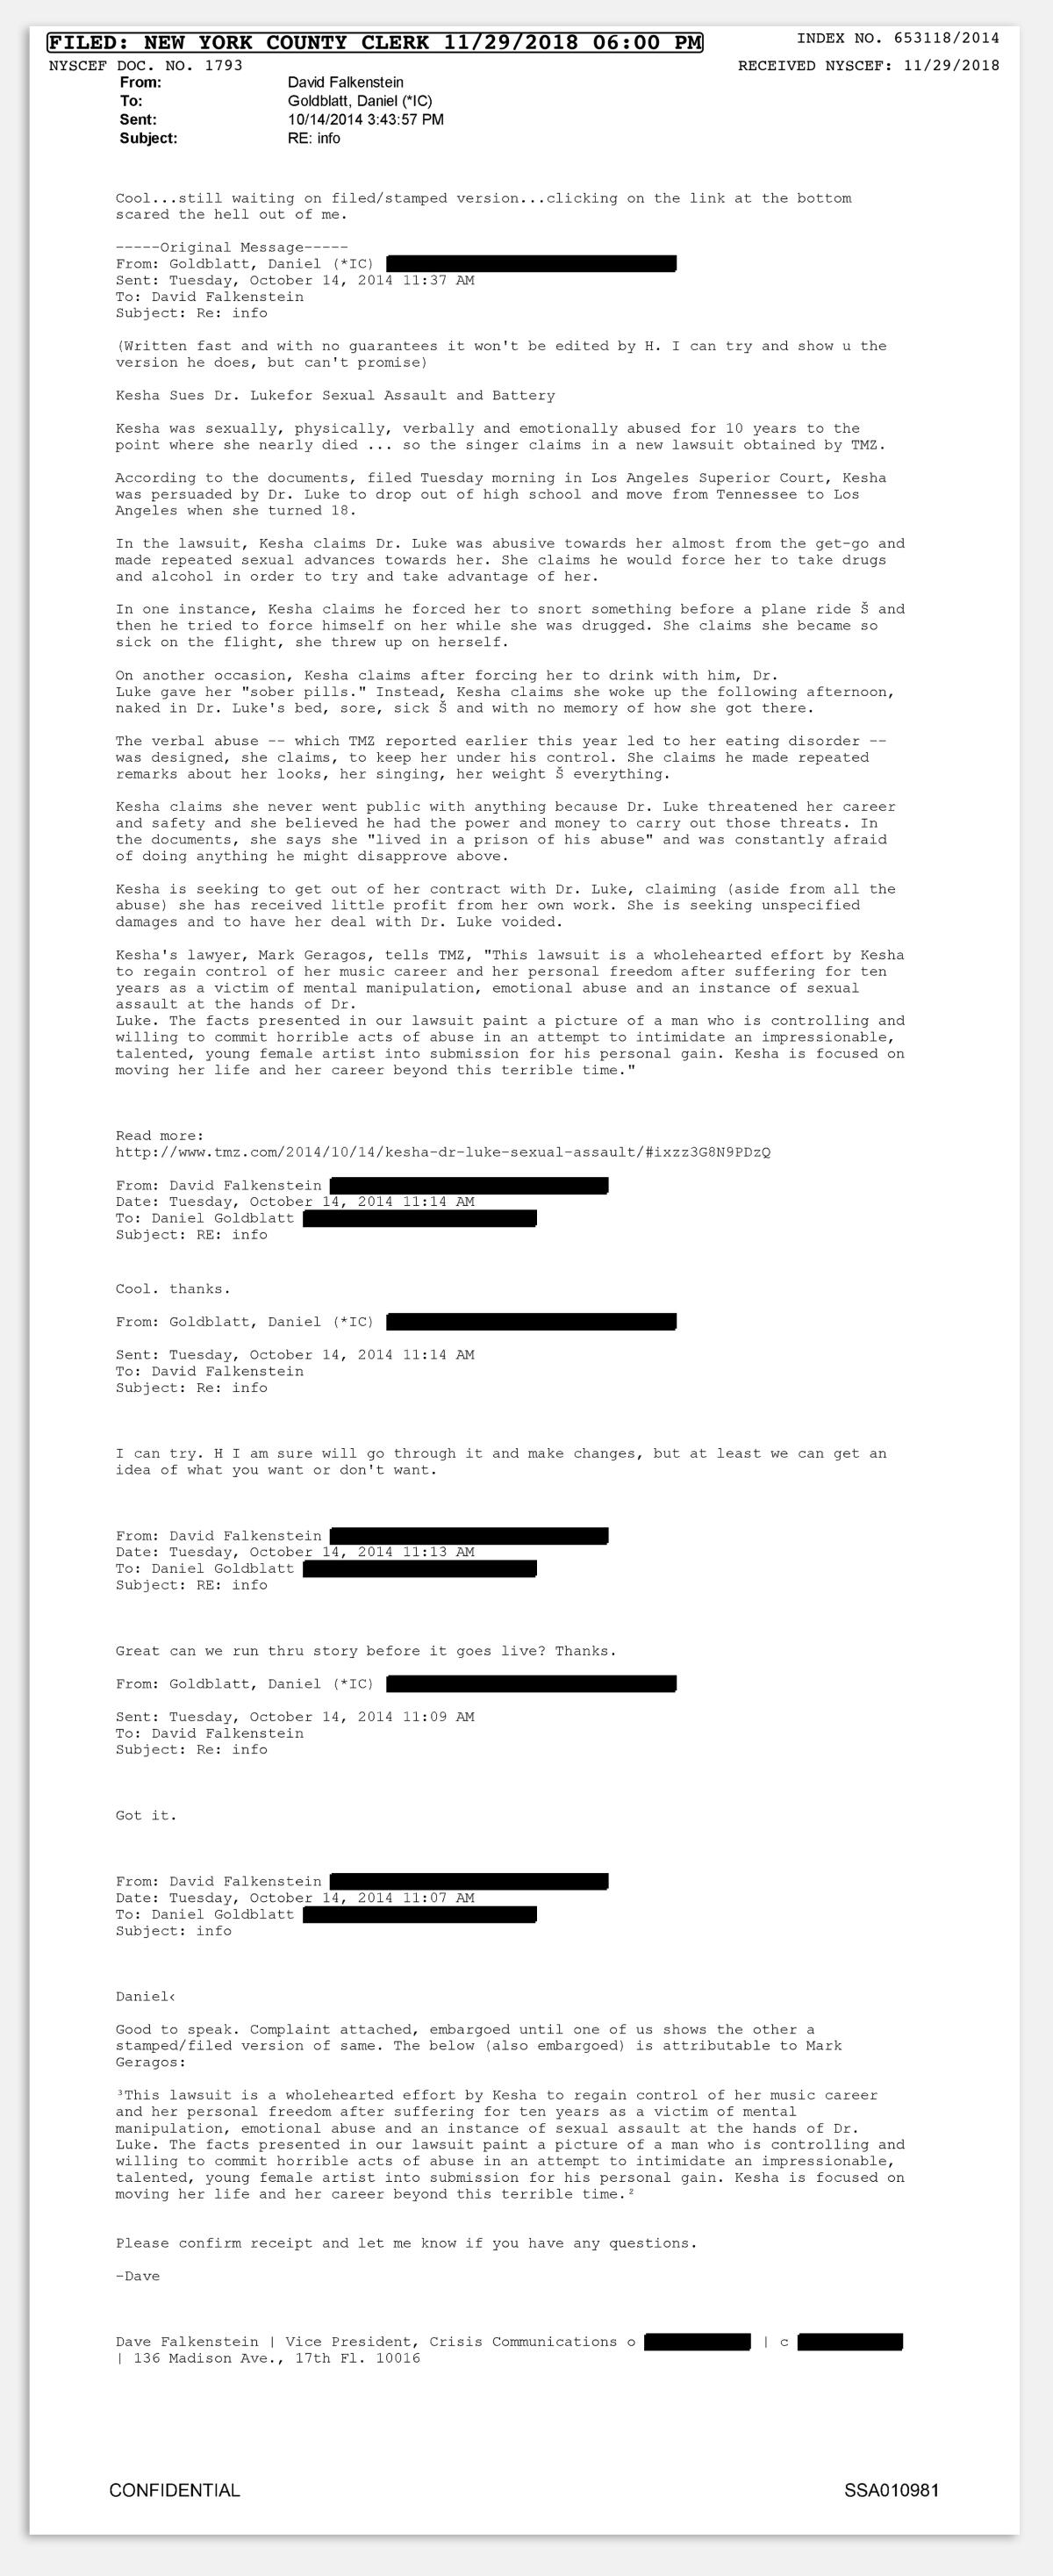 Email from TMZ